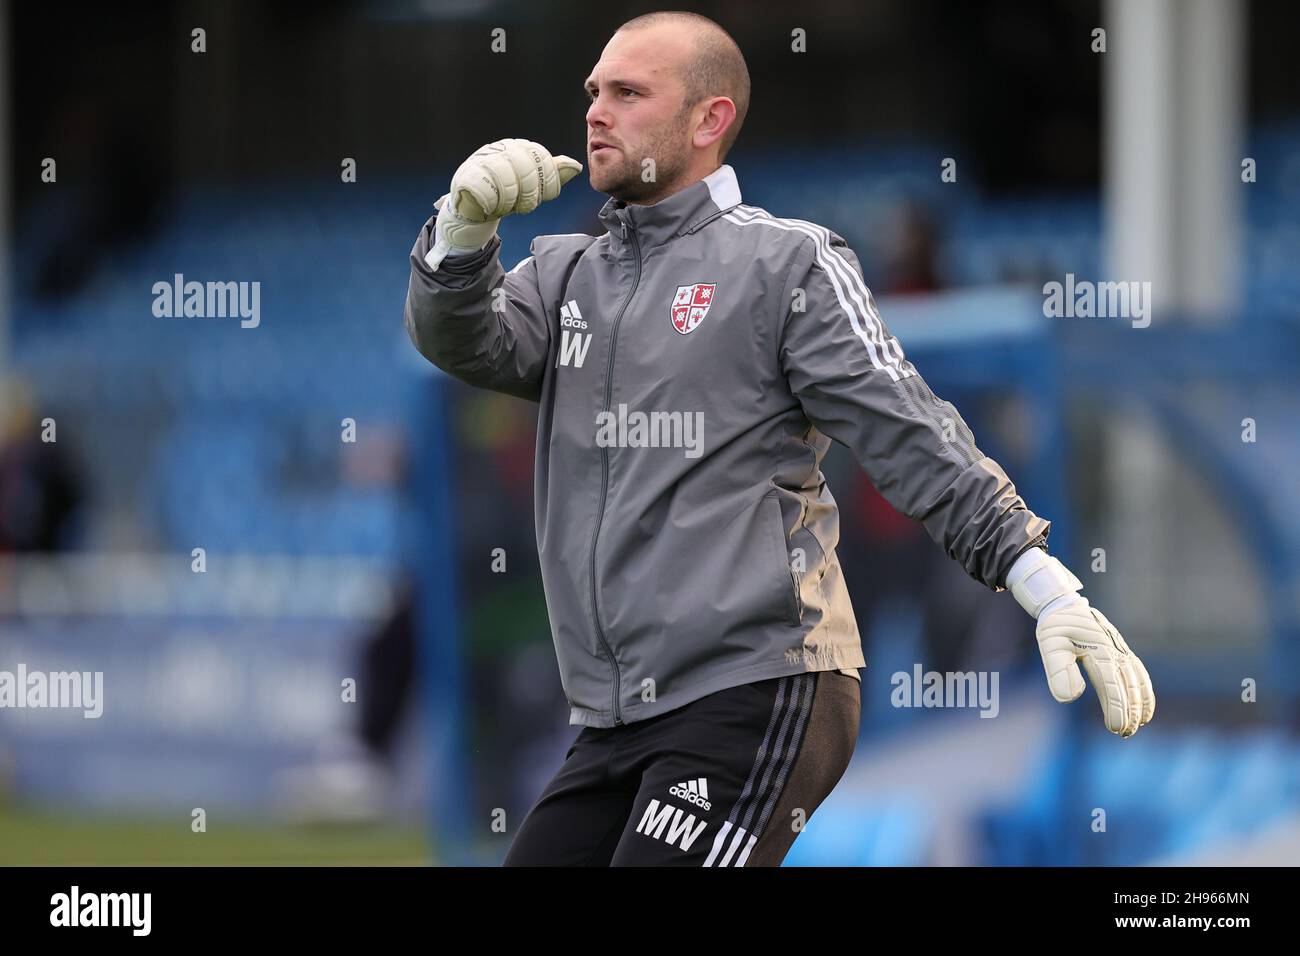 SOLIHULL, ENGLAND. DECEMBER 4TH 2021. Matthew Winter Woking FCÕs goalkeeper coach in the warmup prior to the Vanarama National League match between Solihull Moors and Woking FC at the Armco Stadium, Solihull on Saturday 4th December 2021. (Credit: James Holyoak/Alamy Live News) Stock Photo